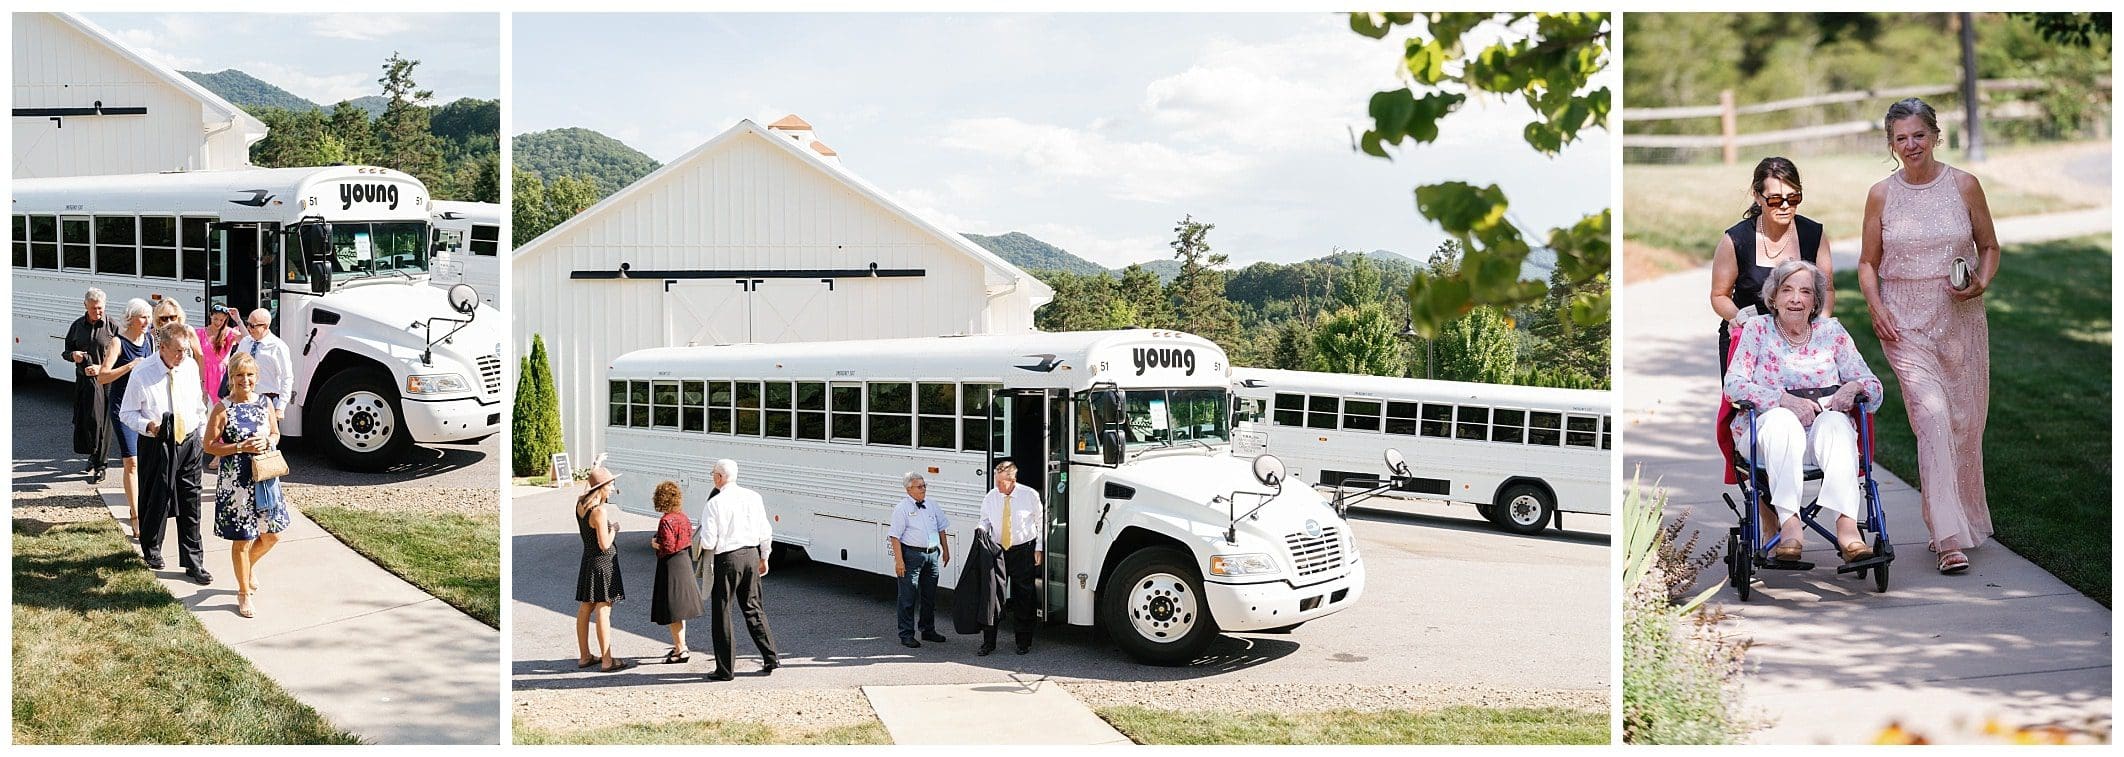 A group of people exiting the  front of a white bus and walking to the wedding cermeony